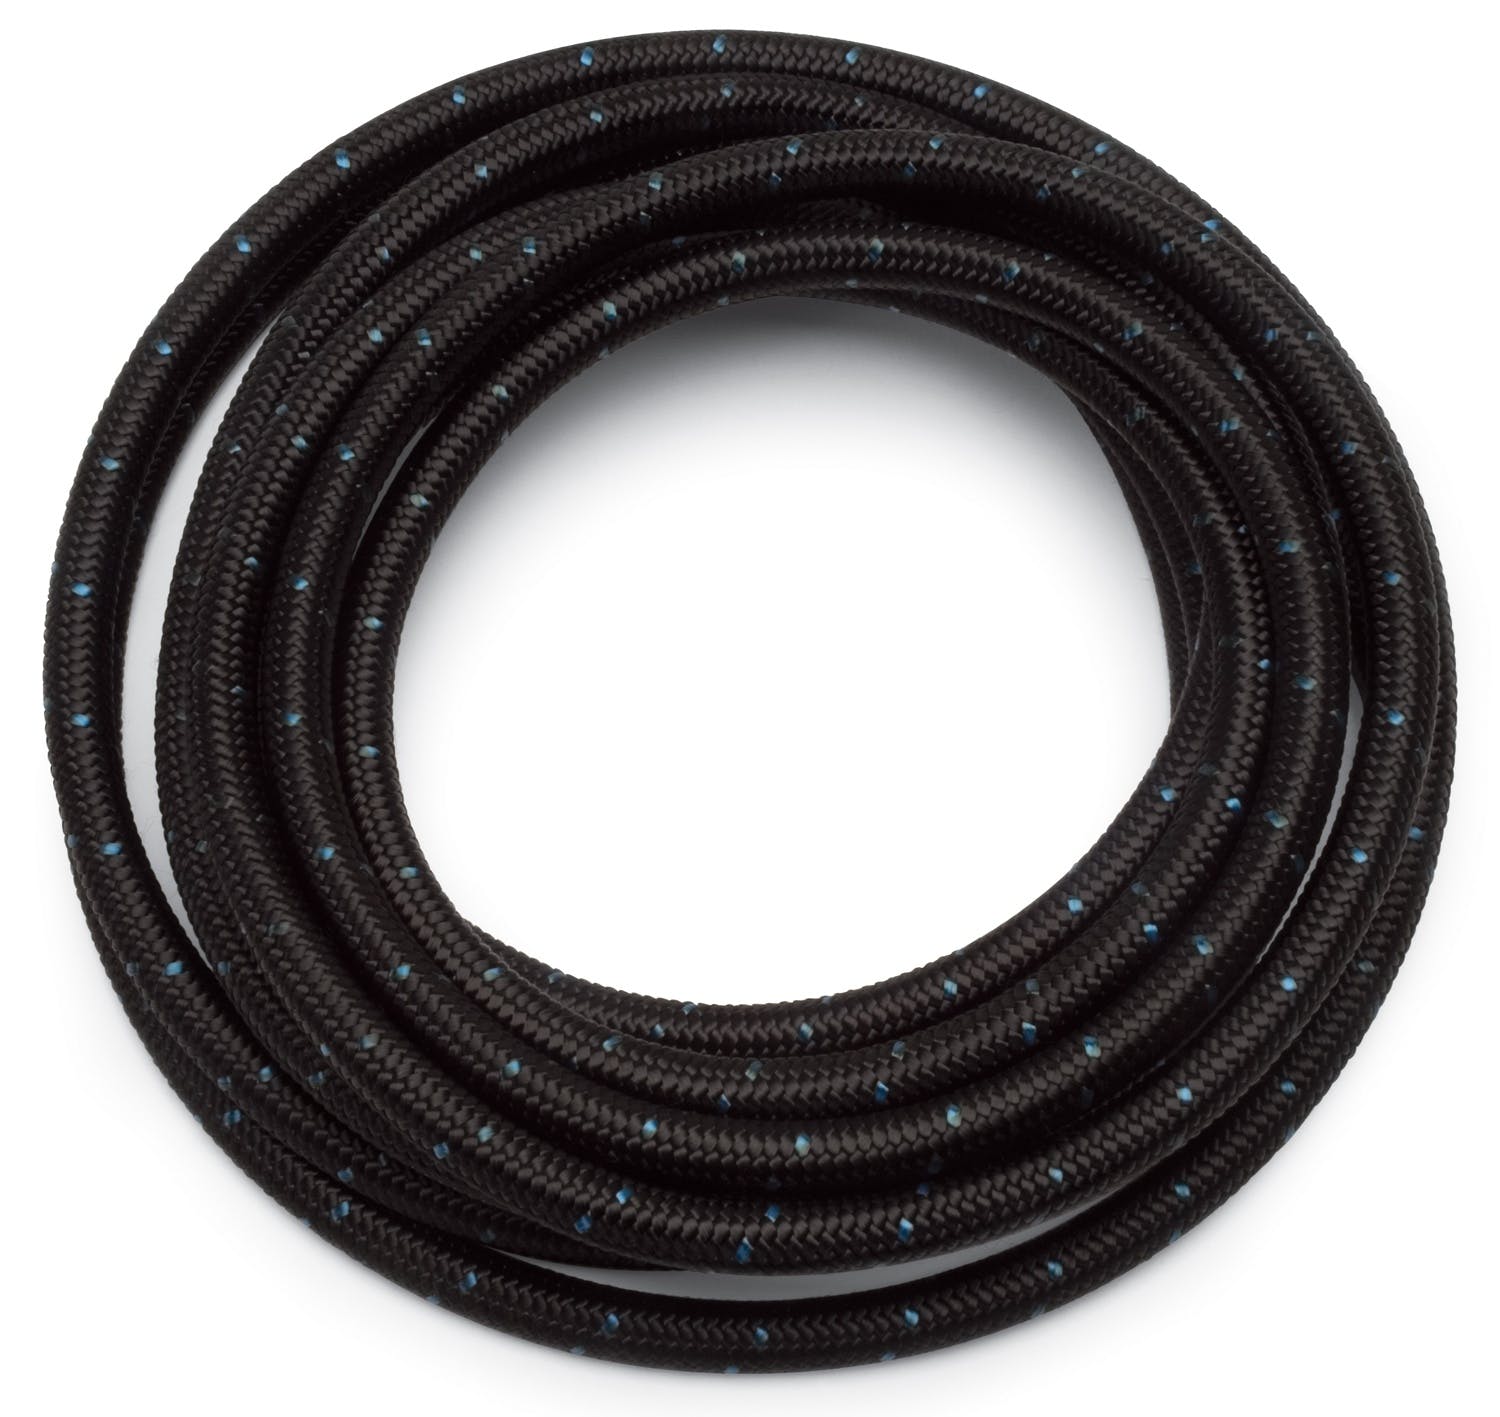 Russell 632213 # 12 Black Cloth Hose  Blue Tracer  6ft length